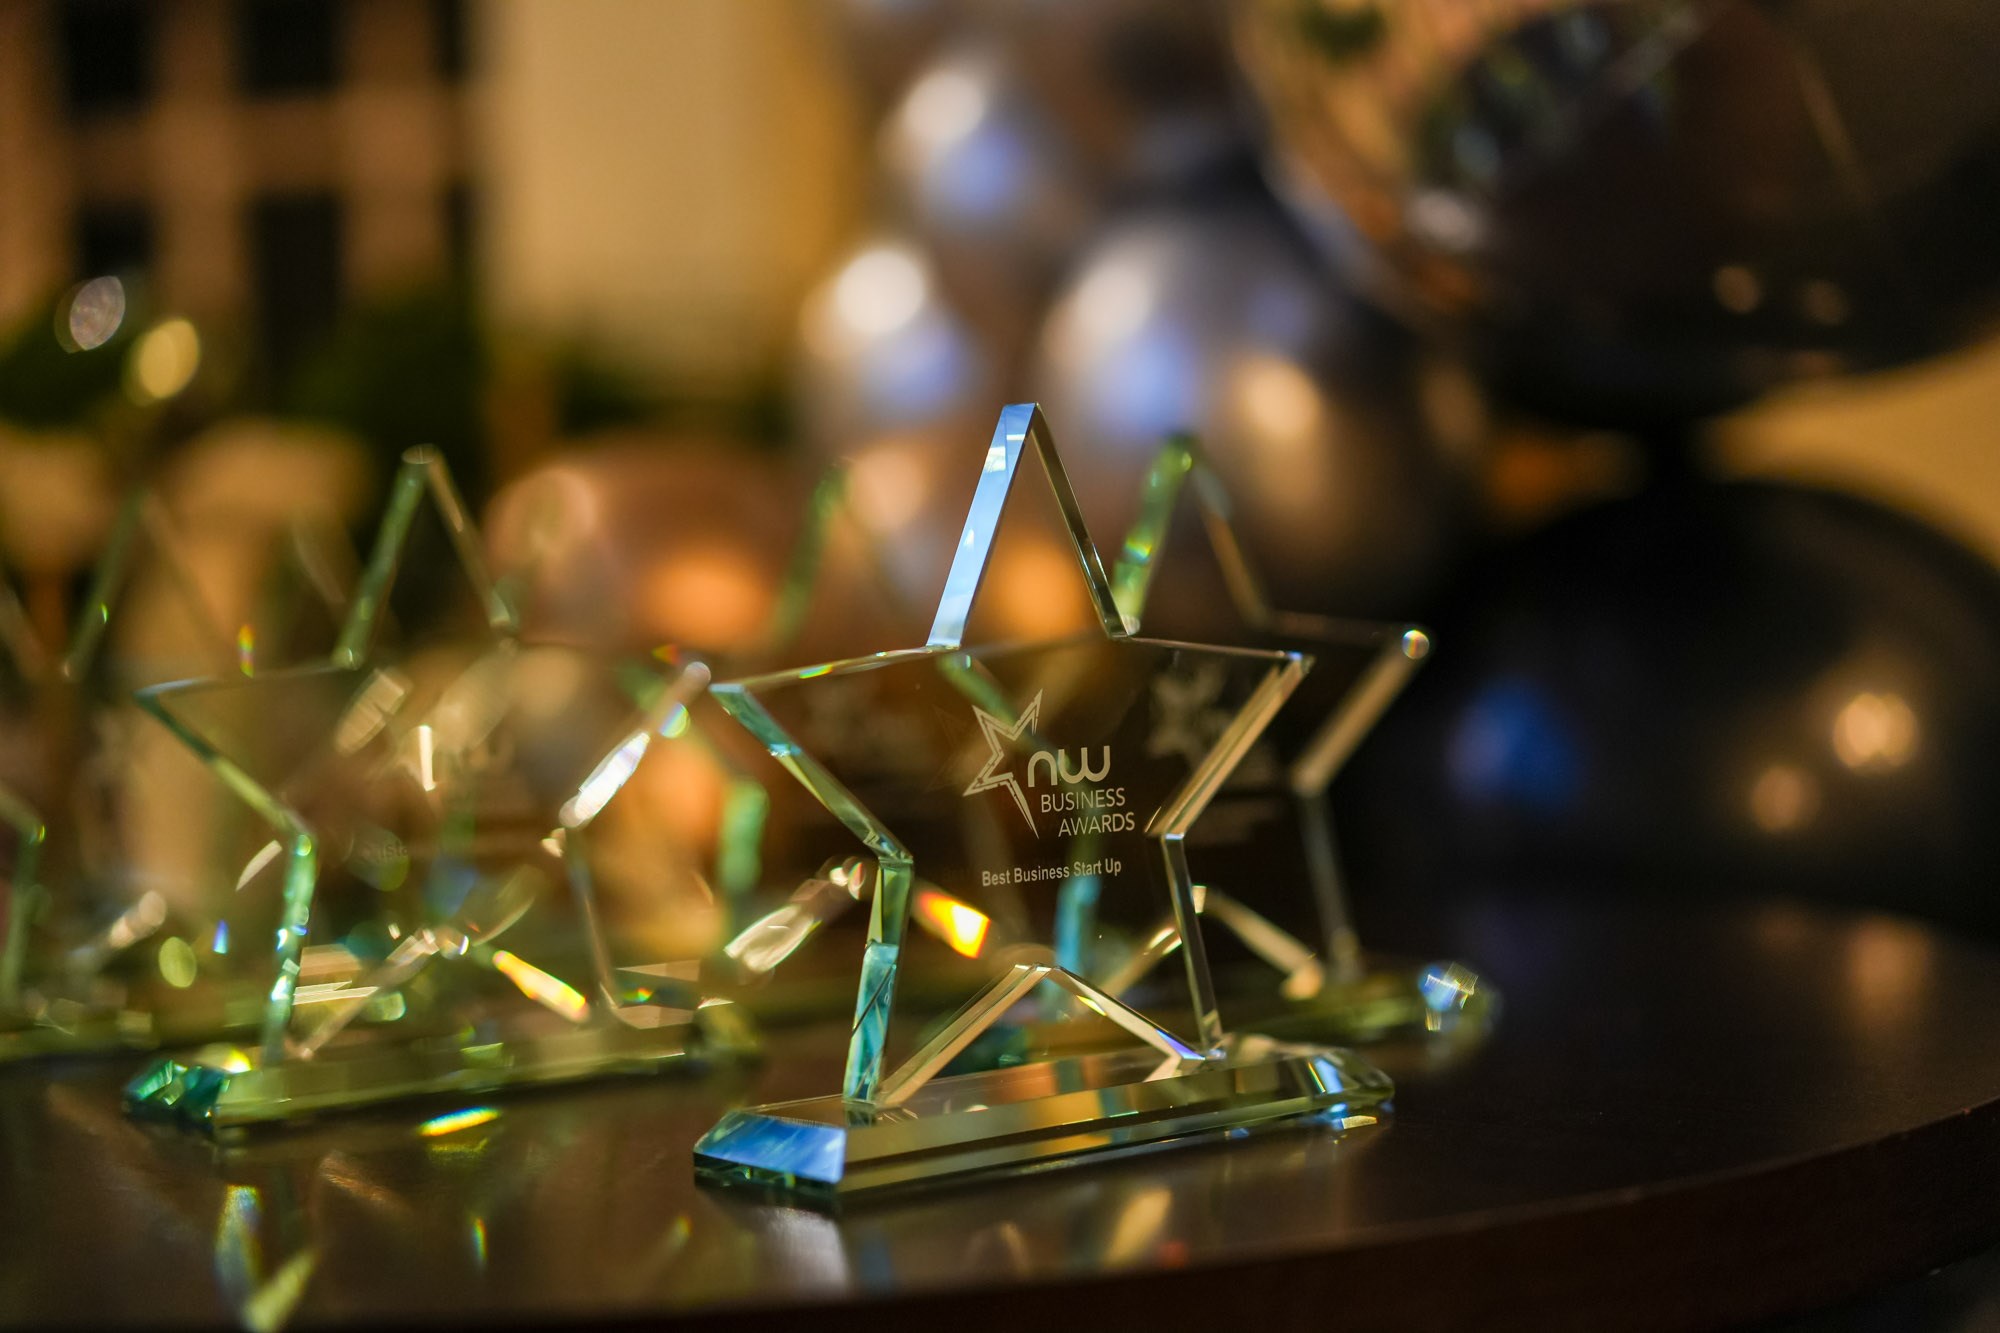 close up view of the award evening awards which are crystal glass stars